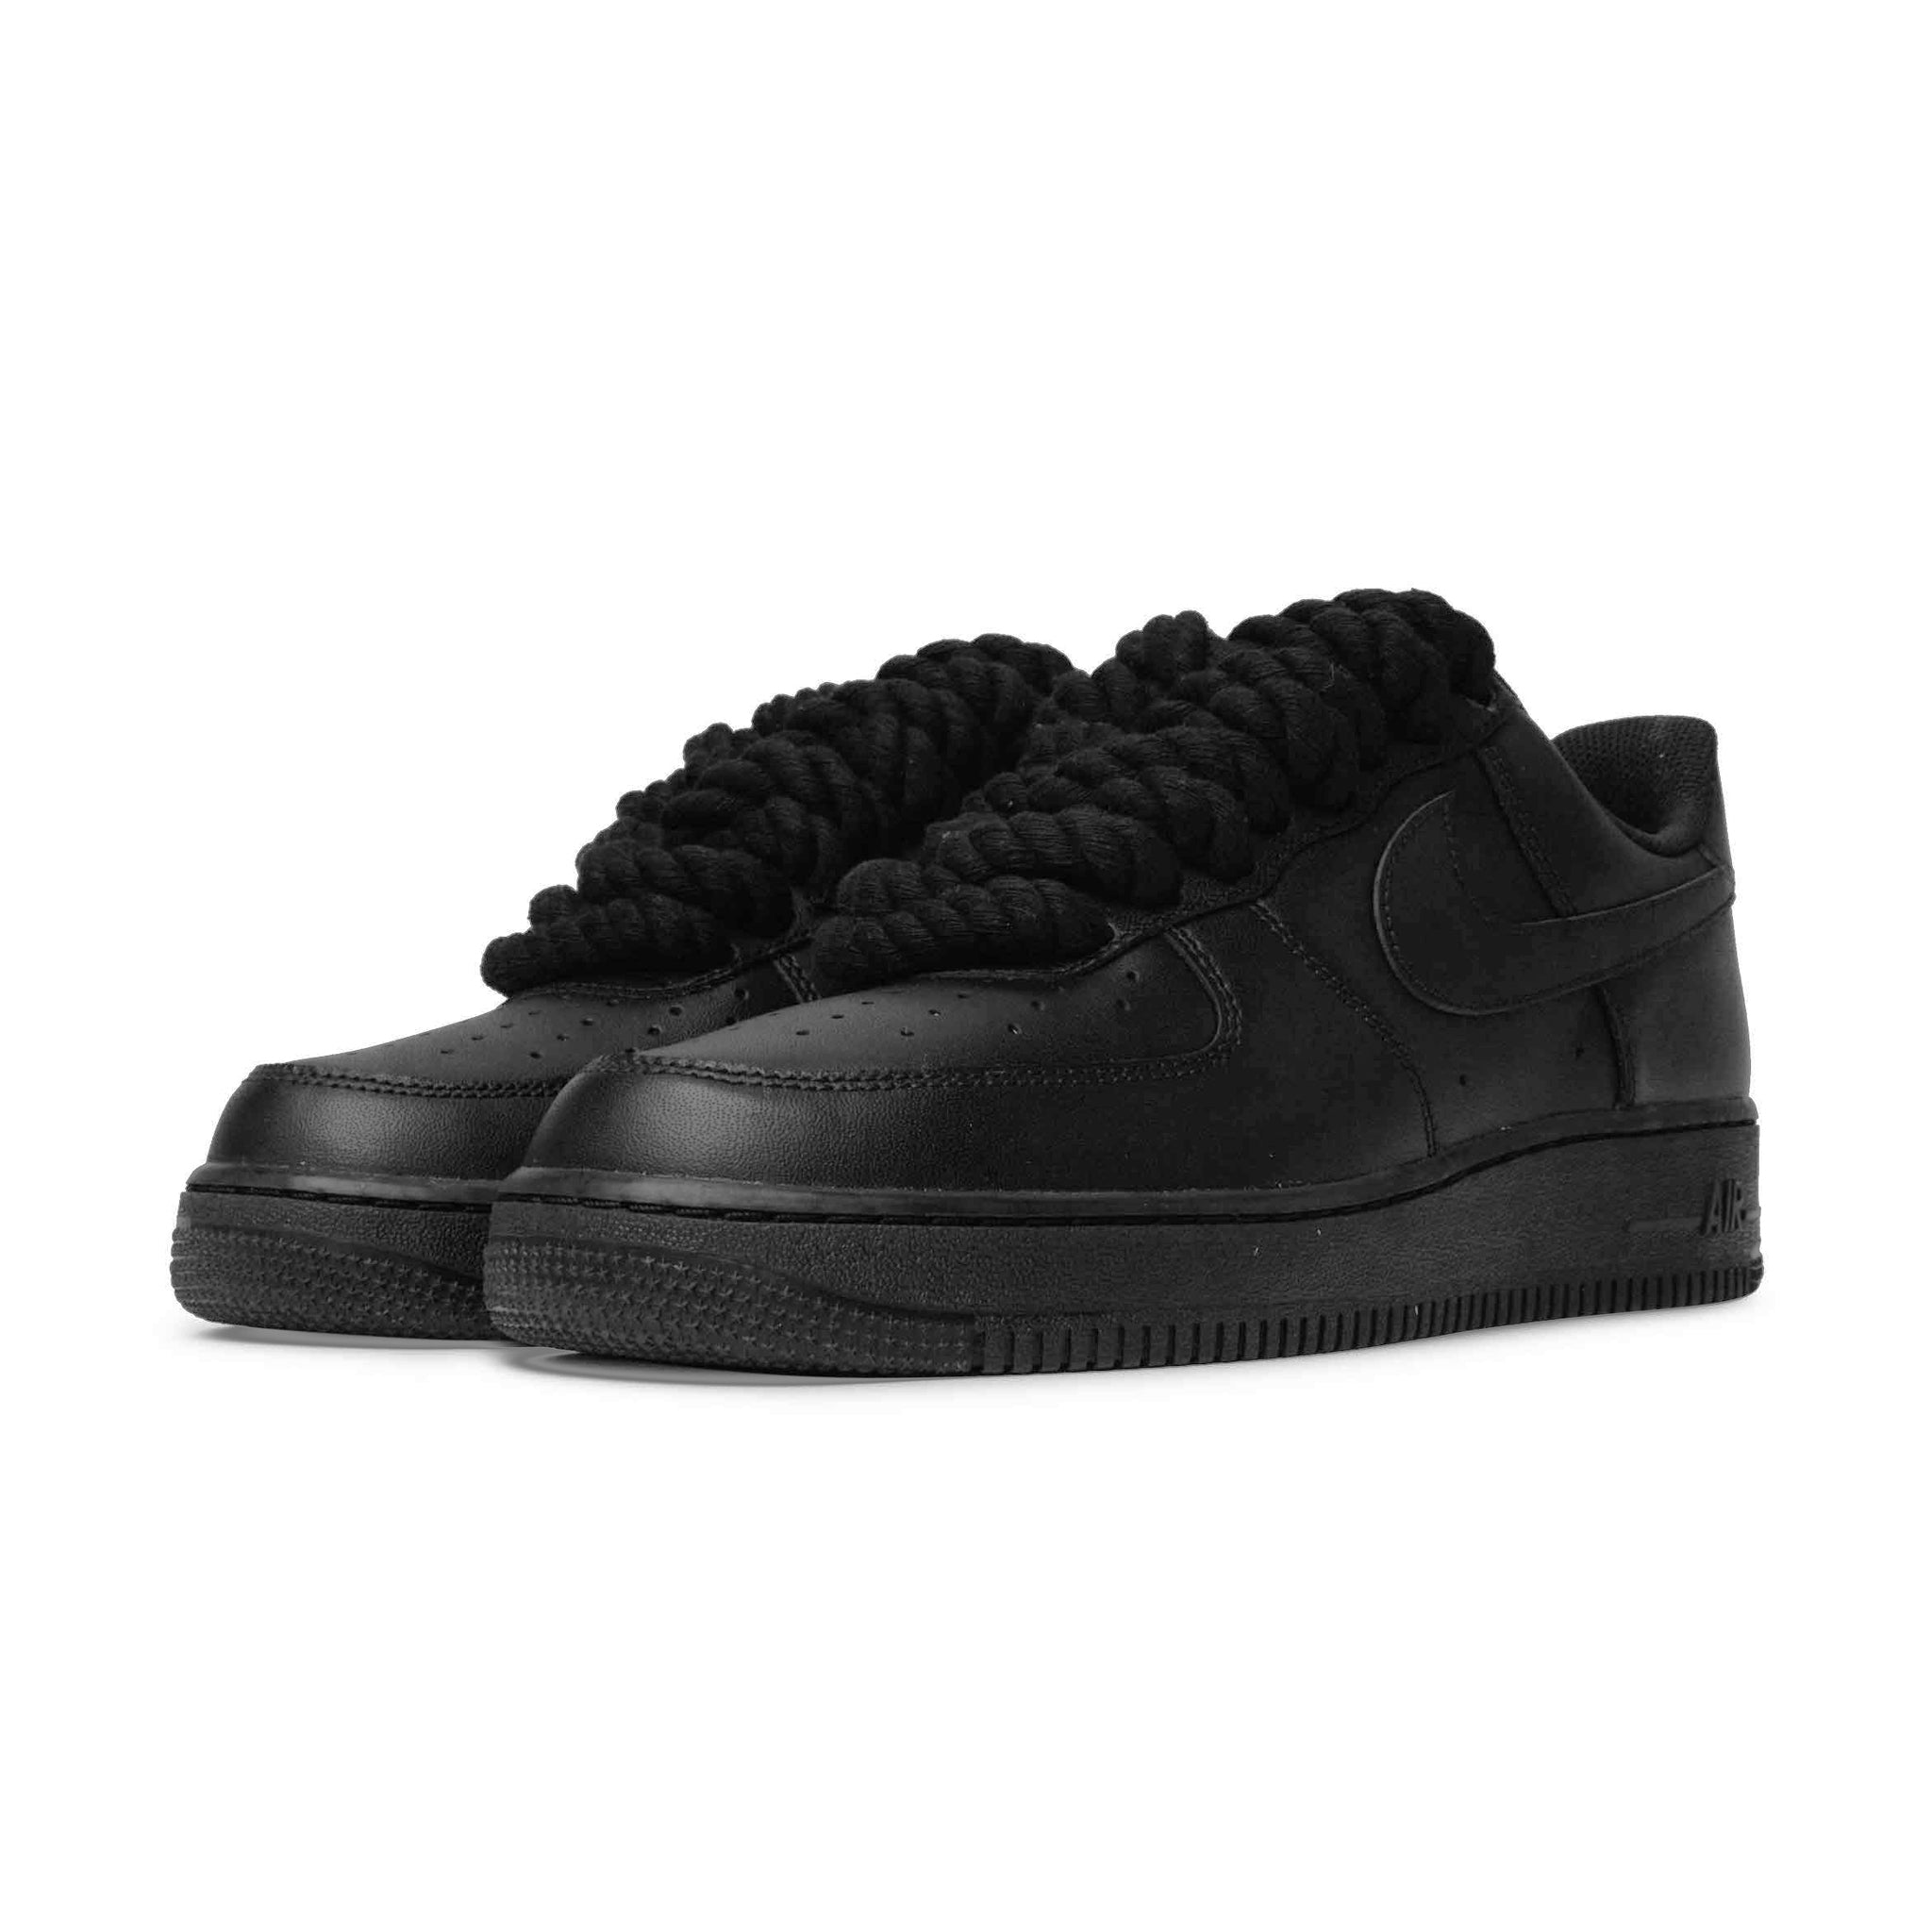 Front side view of Nike Air Force 1 Low Rope Lace Black (GS) 314192-009